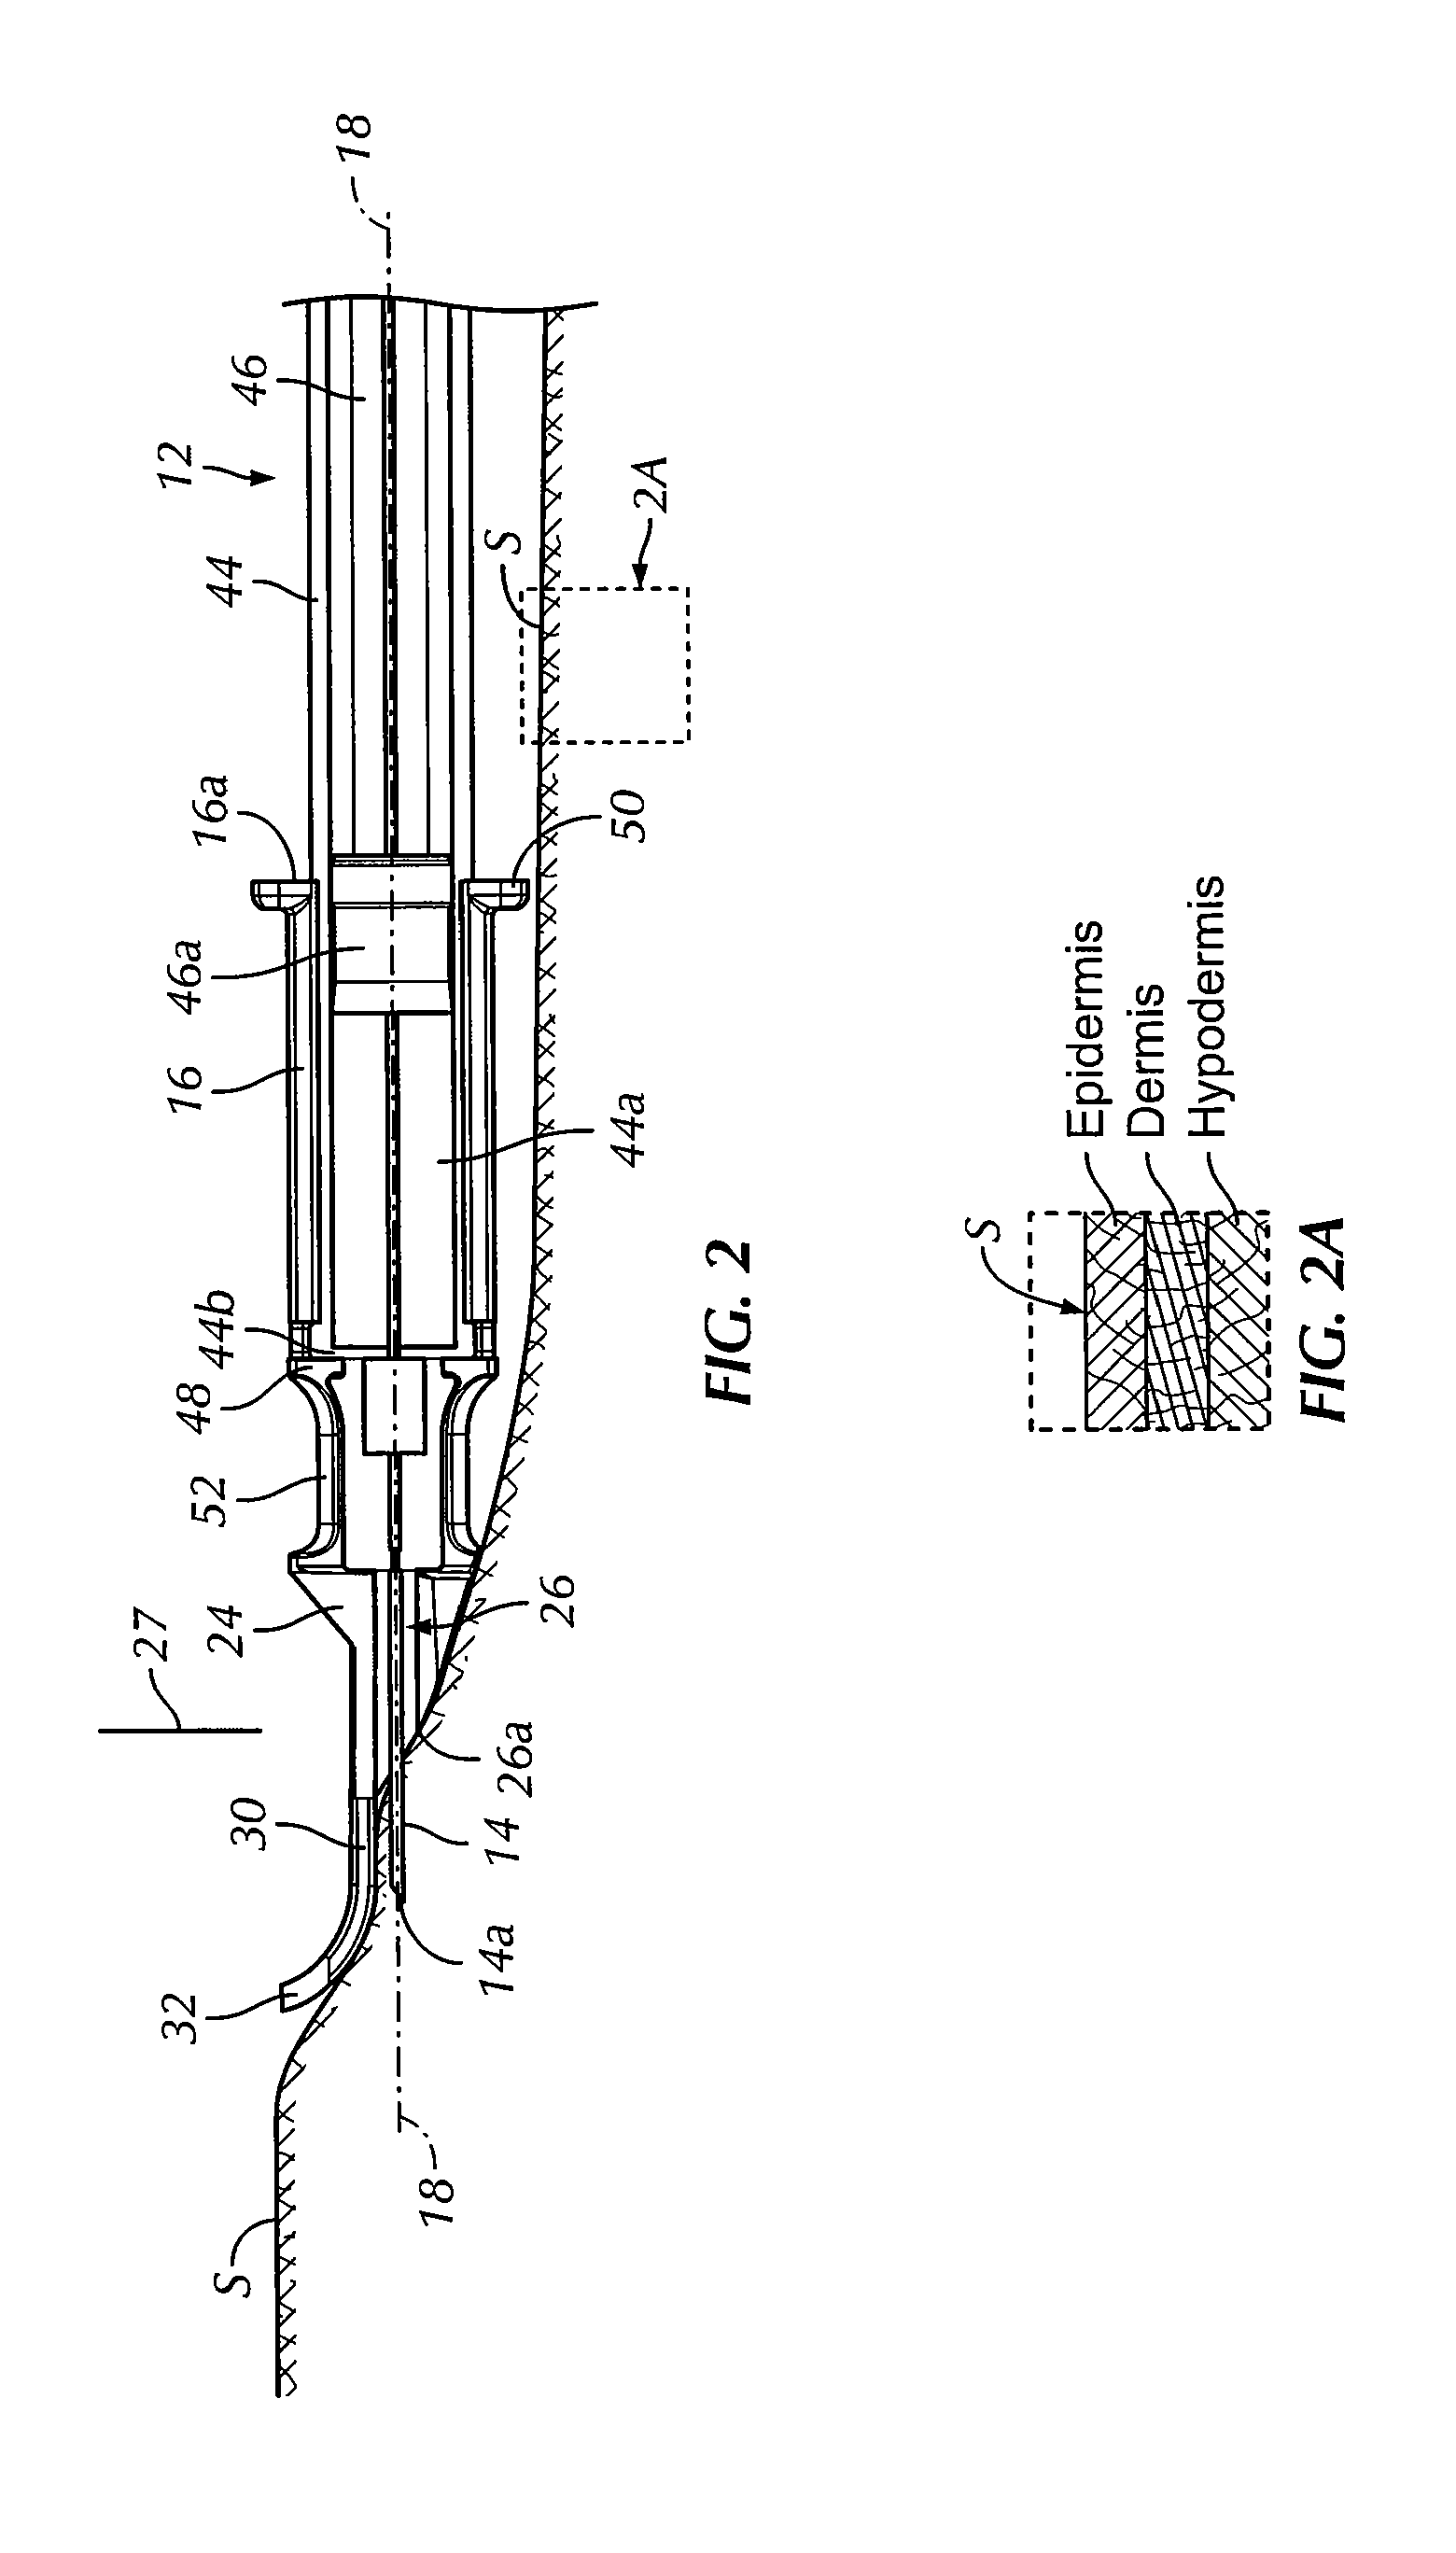 Intradermal injection adapter